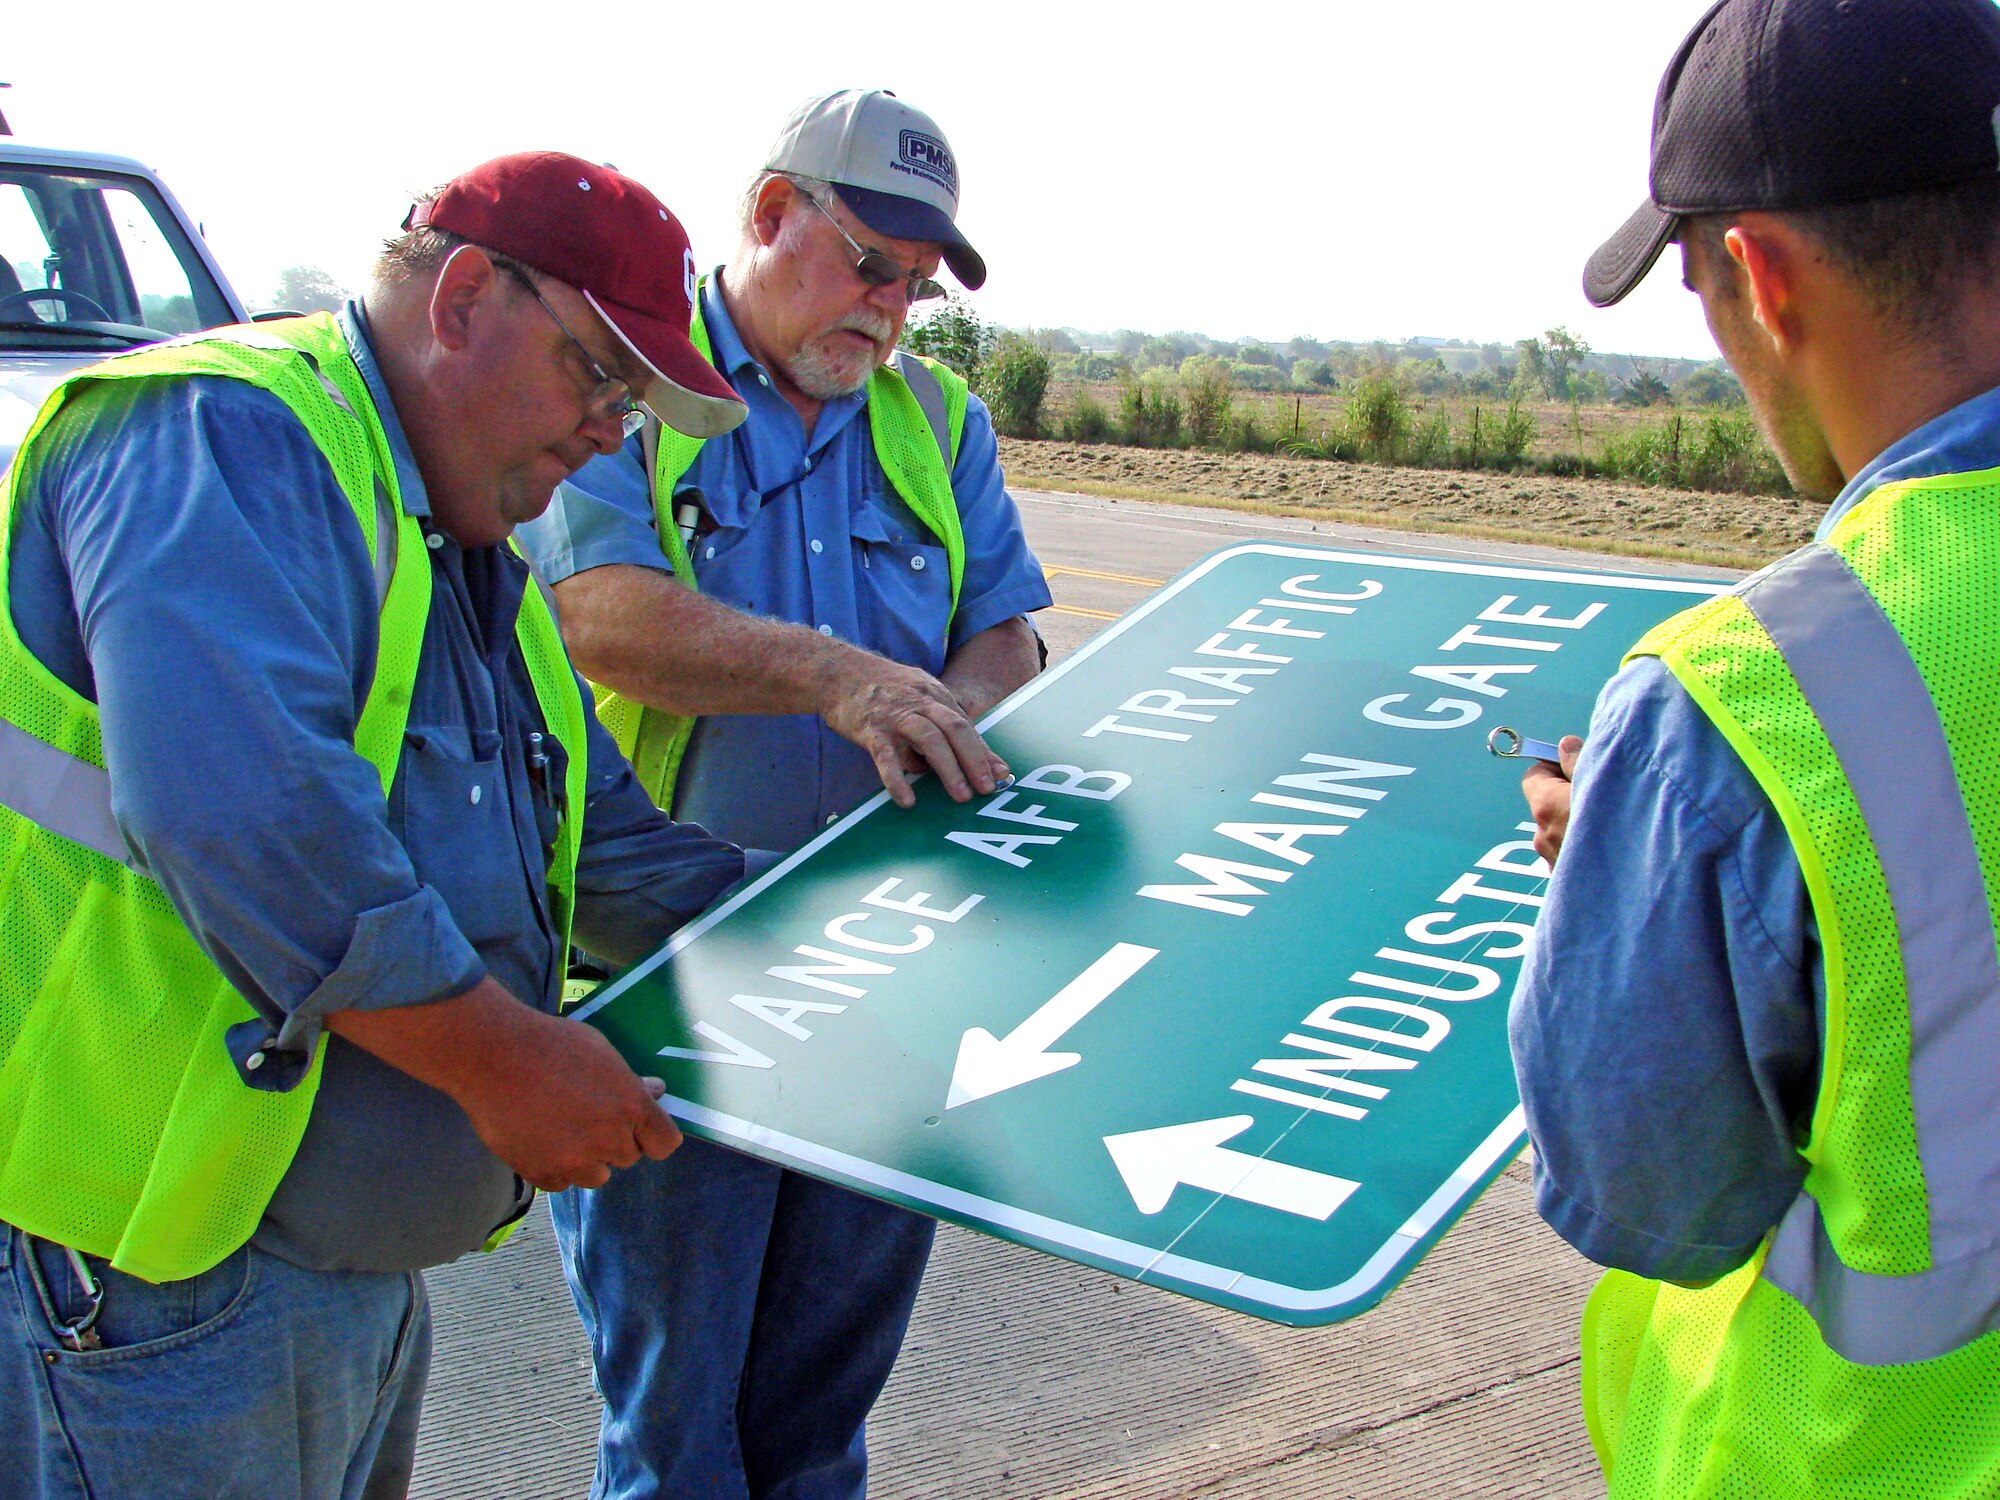 Mike Aguilar, Mike Goodpasture and Bill Hawkins, City of Enid Division of Traffic Control, prepare to post a sign on Southgate Road directing traffic to Vance Air Force Base. The traffic flow pattern to the base changes Aug. 16 when drivers coming to Vance from Van Buren Street will come to the Main Gate via Southgate and Gott Roads. Drivers coming from Cleveland St. will be able to access the base via the Industrial/West Gate during duty hours.  After duty hours, Industrial/West Gate and the perimeter fence access gate on Cleveland will be closed, requiring all vehicle traffic to access the base via Southgate. Drivers should be prepared for traffic delays during this transition period and should plan accordingly.            